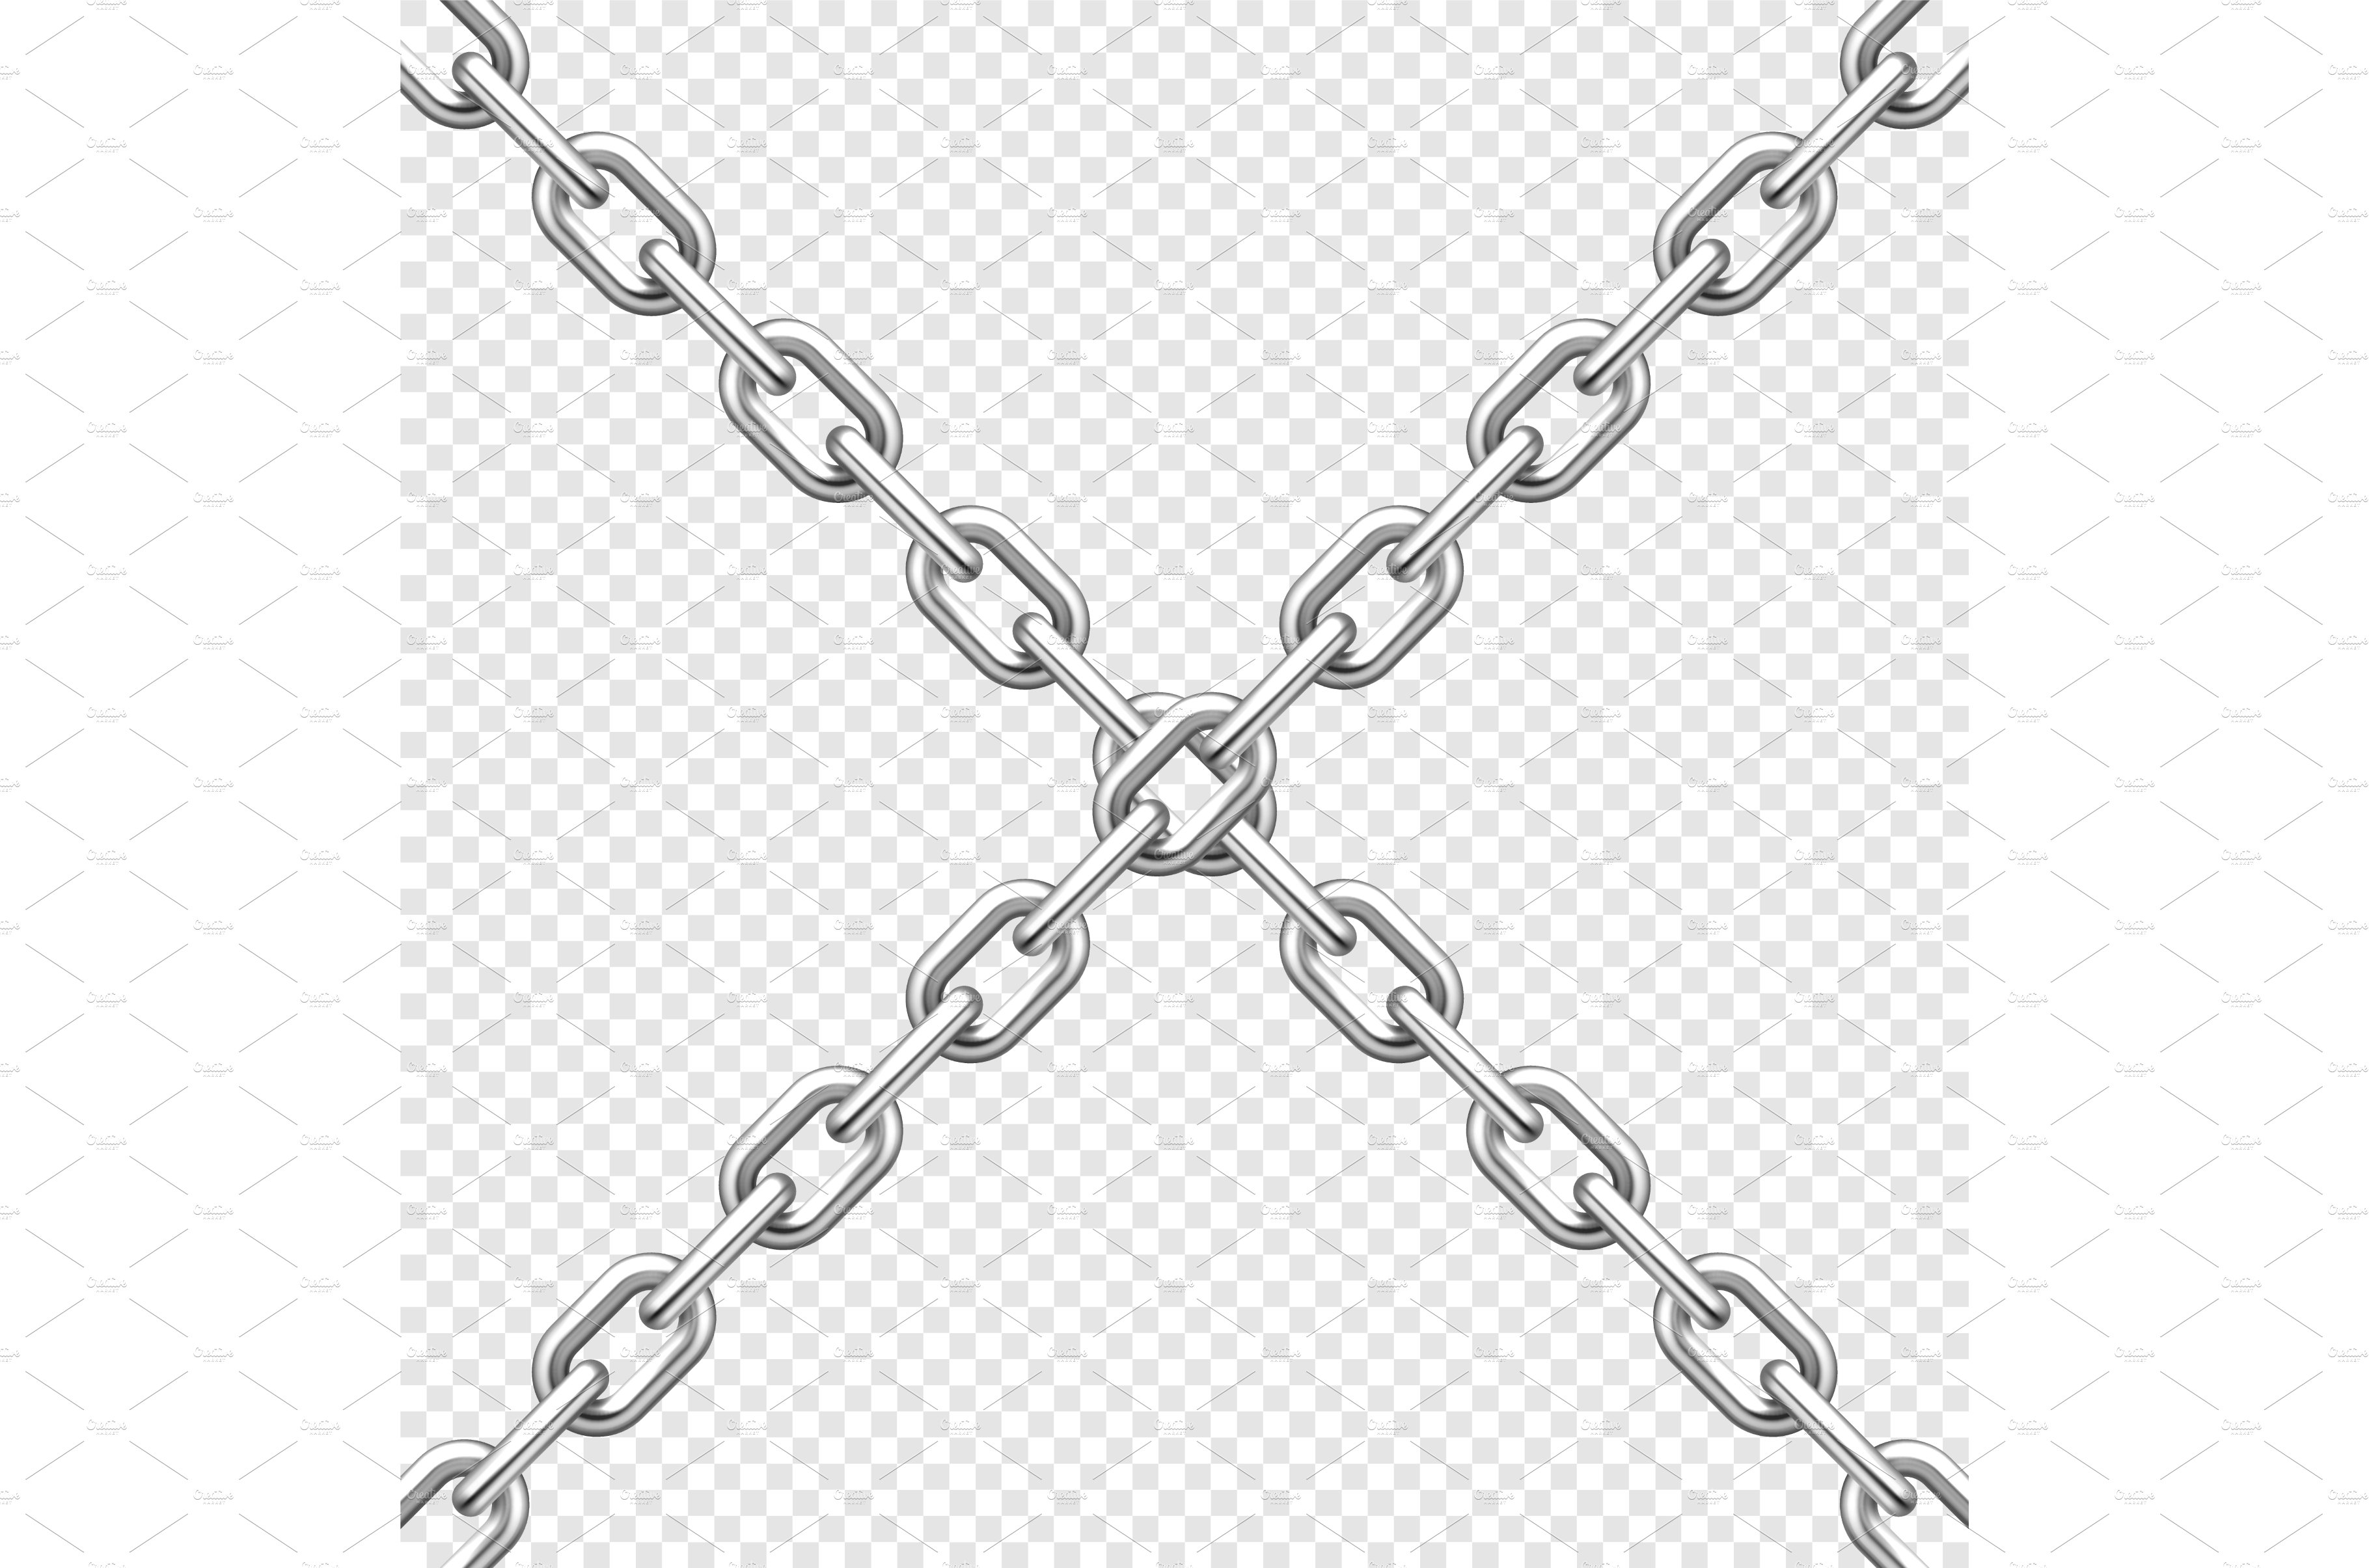 Realistic crossing metal chains with cover image.